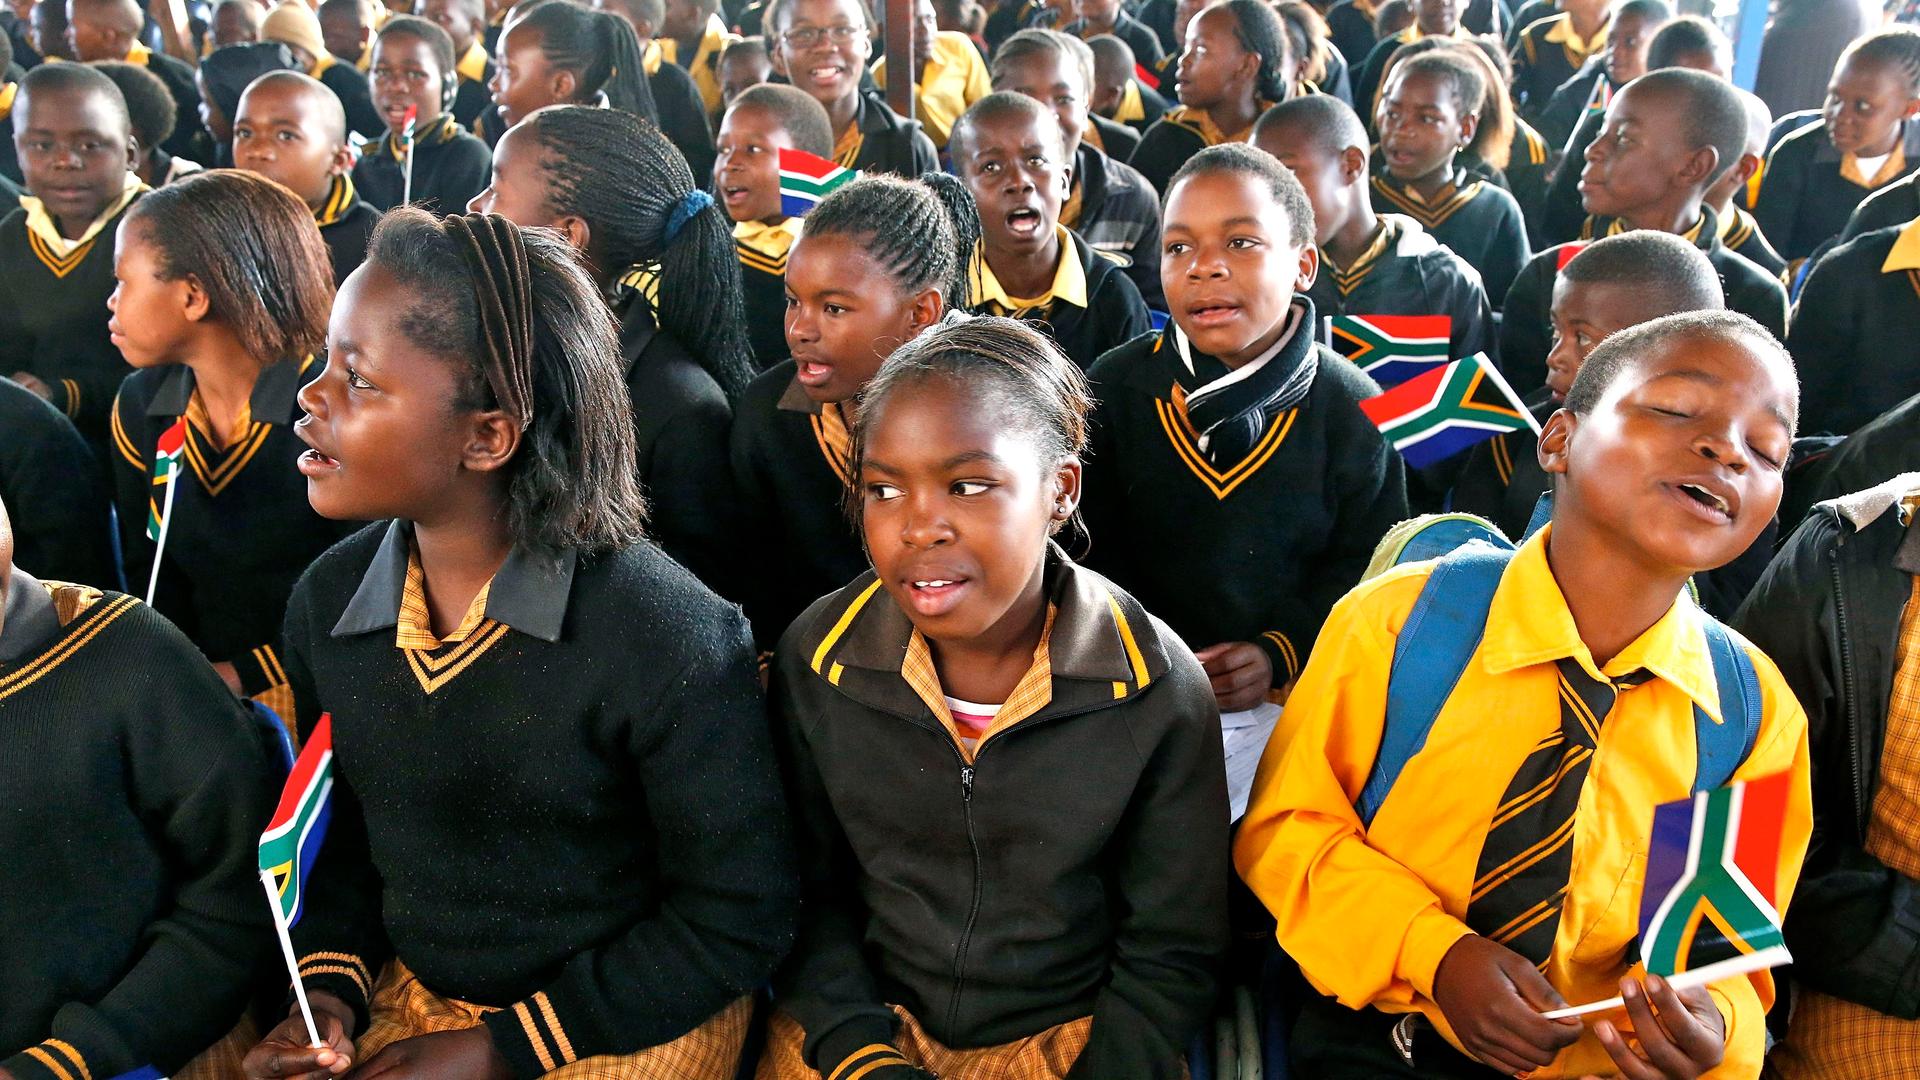 Children at a township school in Atteridgevile, South Africa. In post-apartheid South Africa, children are no longer required to learn the Afrikaans language. 